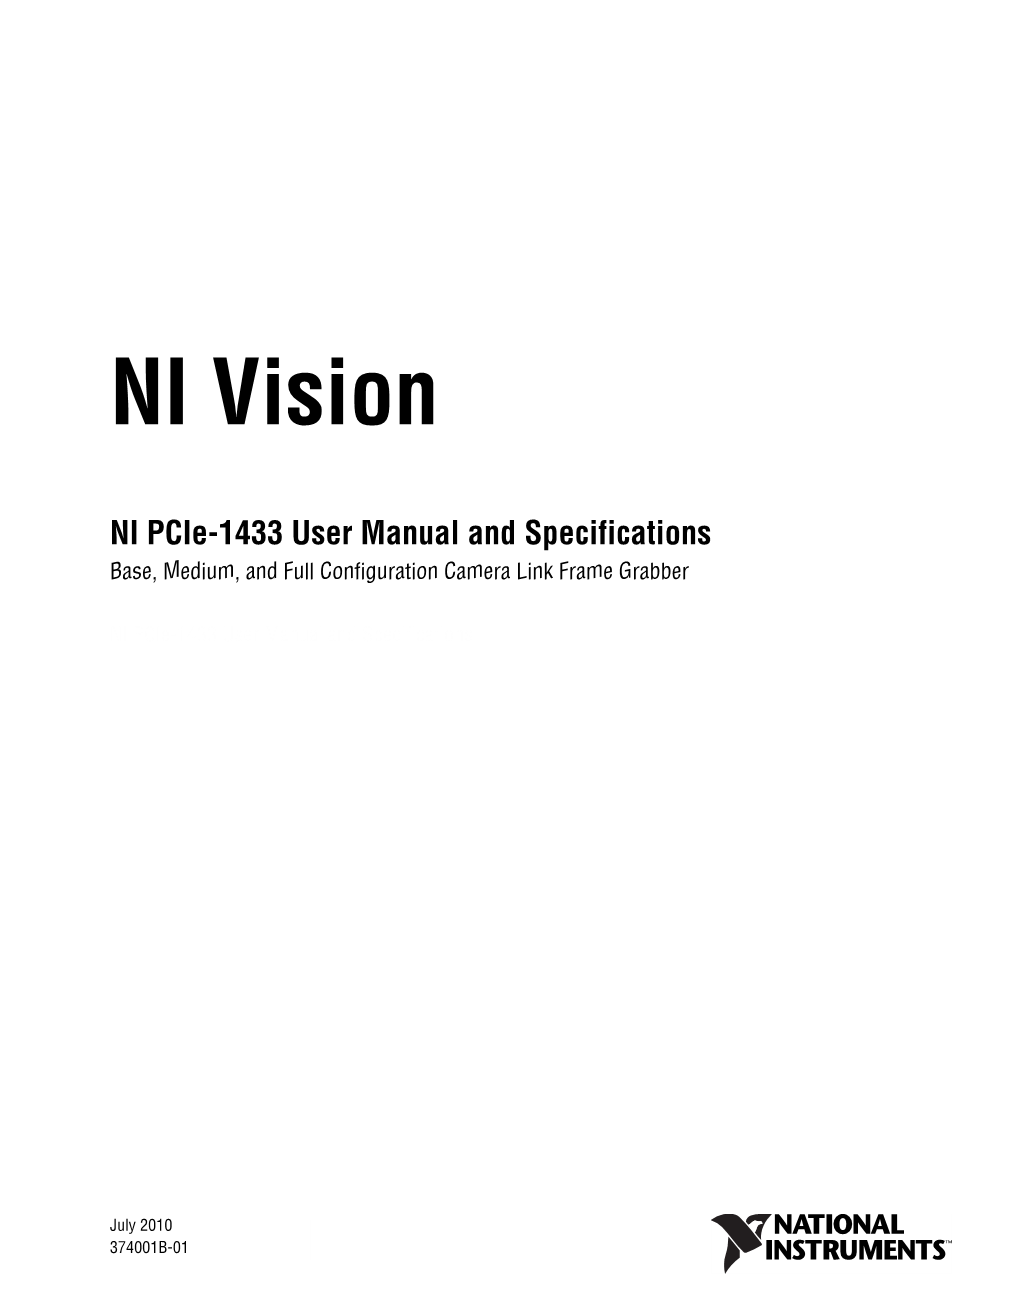 NI Pcie-1433 User Manual and Specifications Base, Medium, and Full Configuration Camera Link Frame Grabber